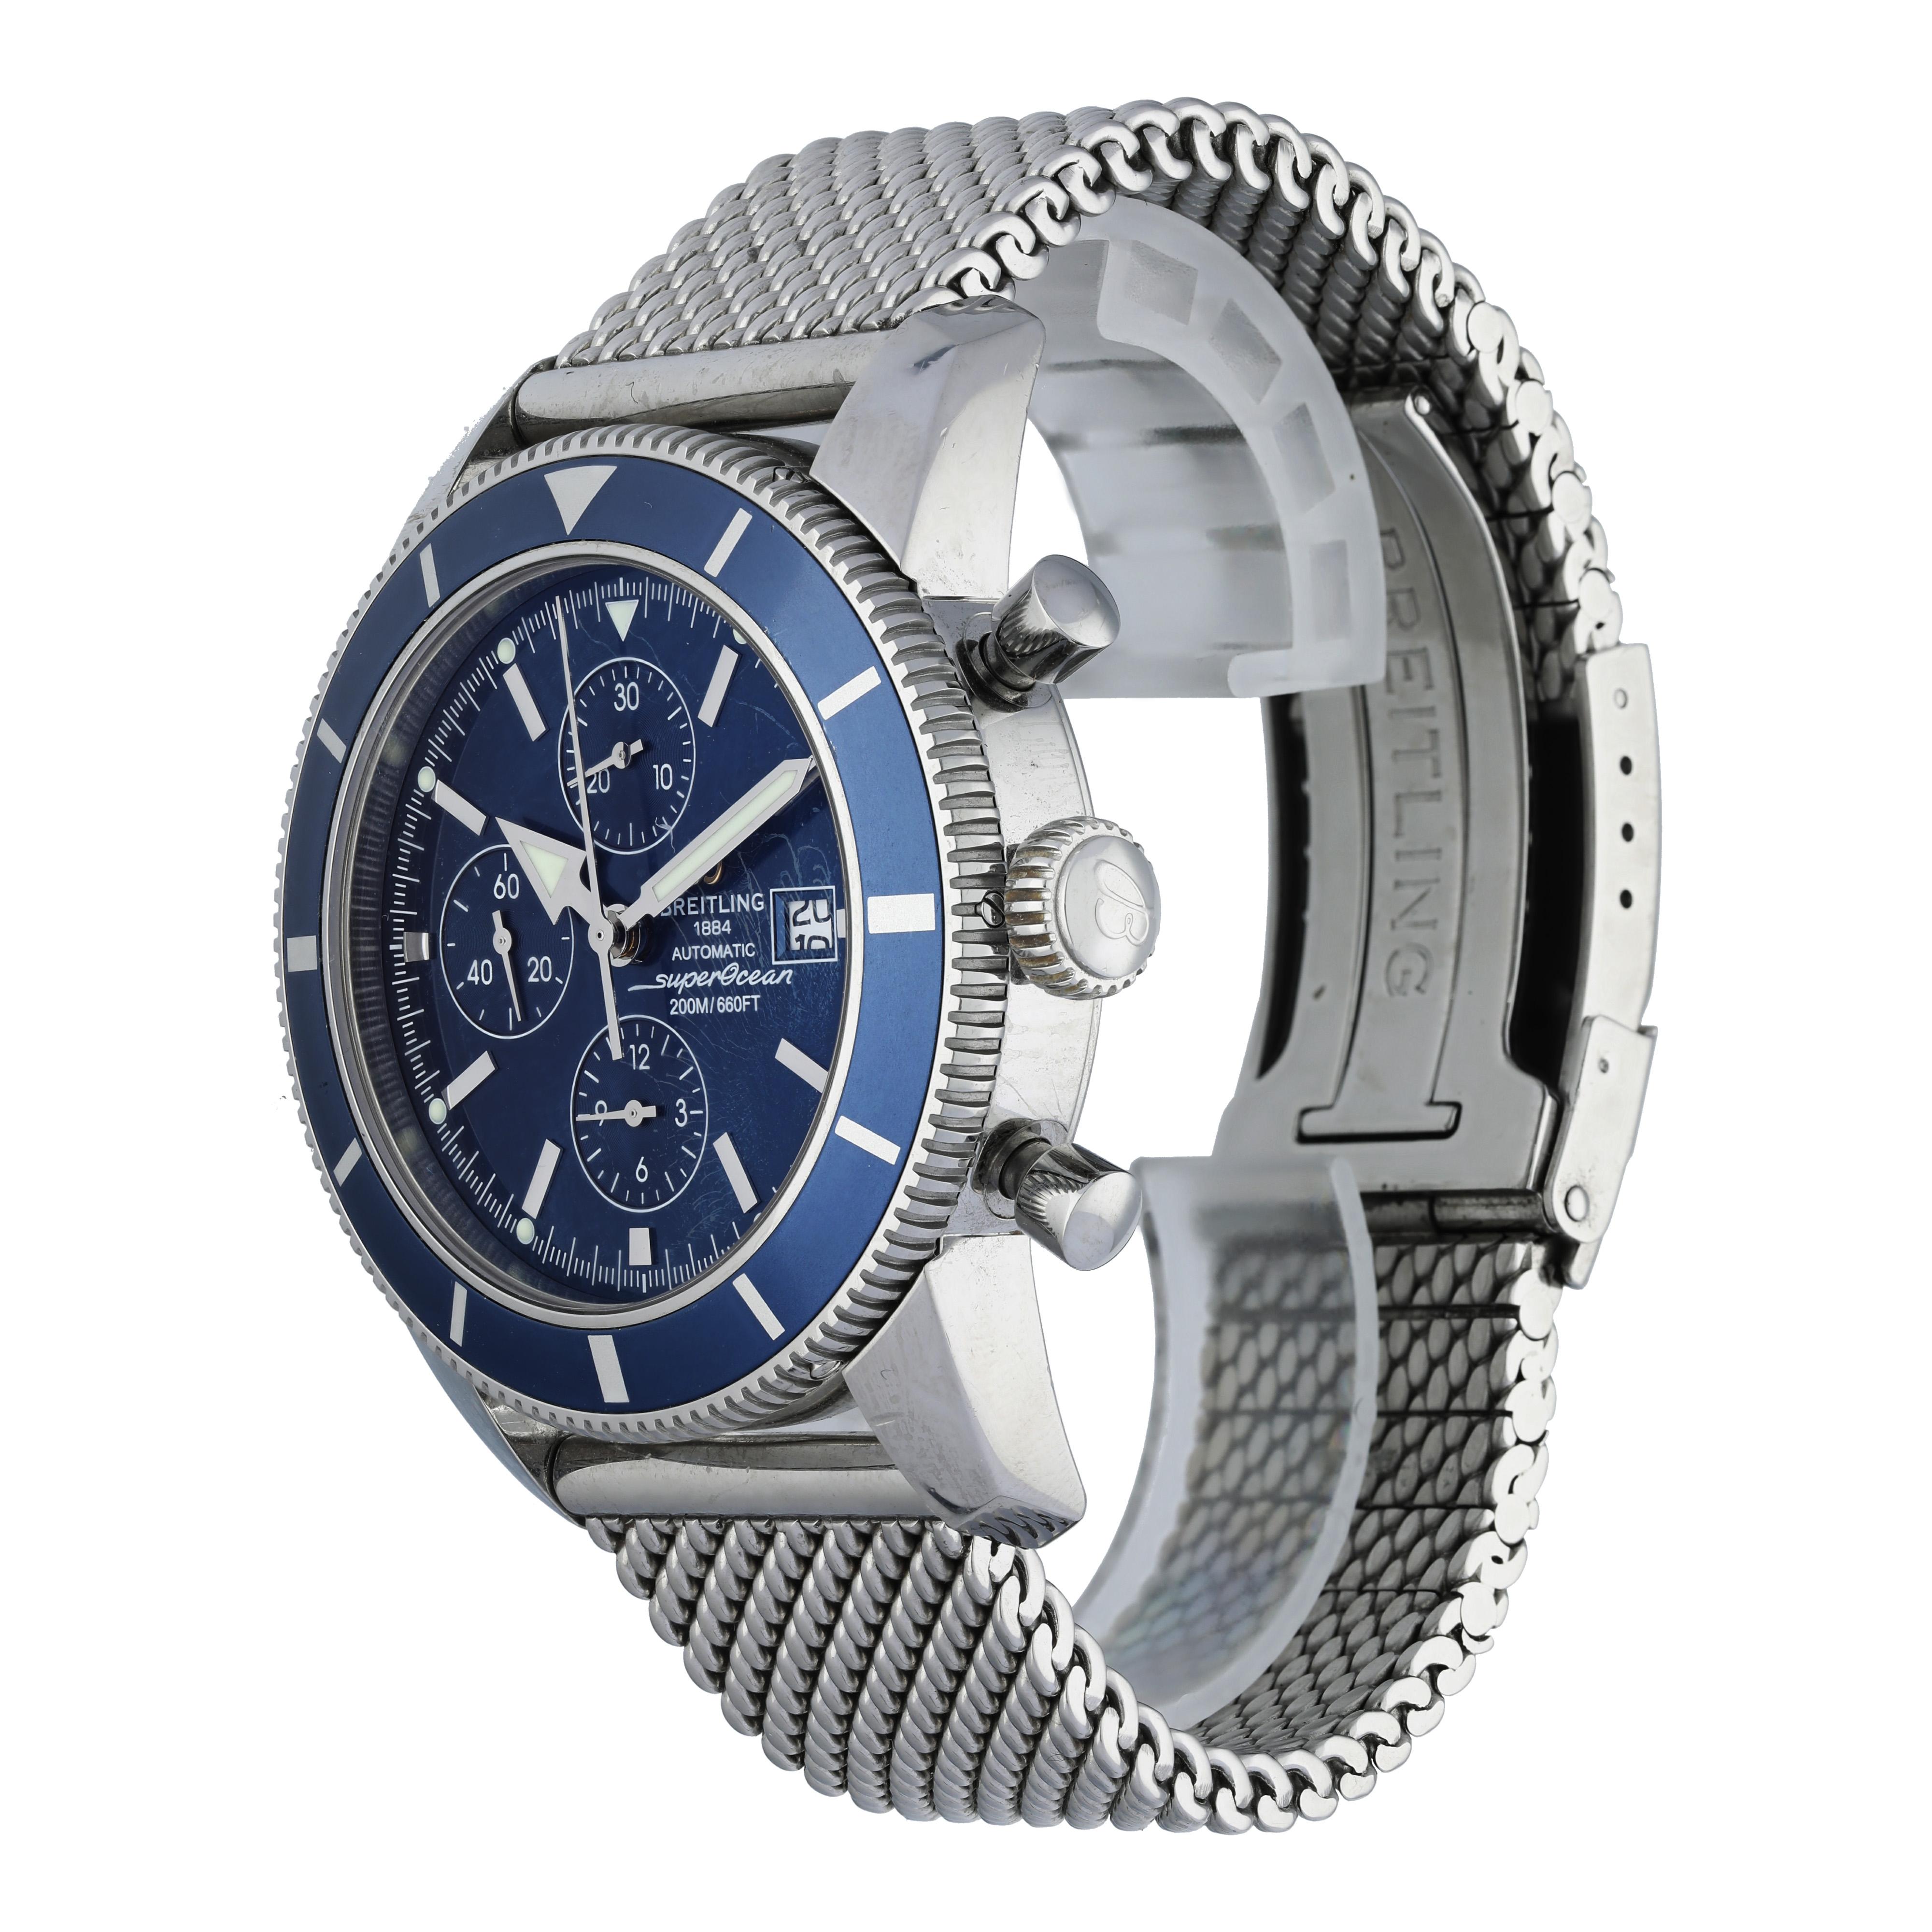 Breitling Superocean Heritage Chronograph A13320 Men's Watch. 
46mm Stainless Steel case. 
stainless steel Unidirectional rotating bezel. 
Blue dial with Luminous Steel hands and index, dot hour markers.
Minute markers on the outer dial. 
Date